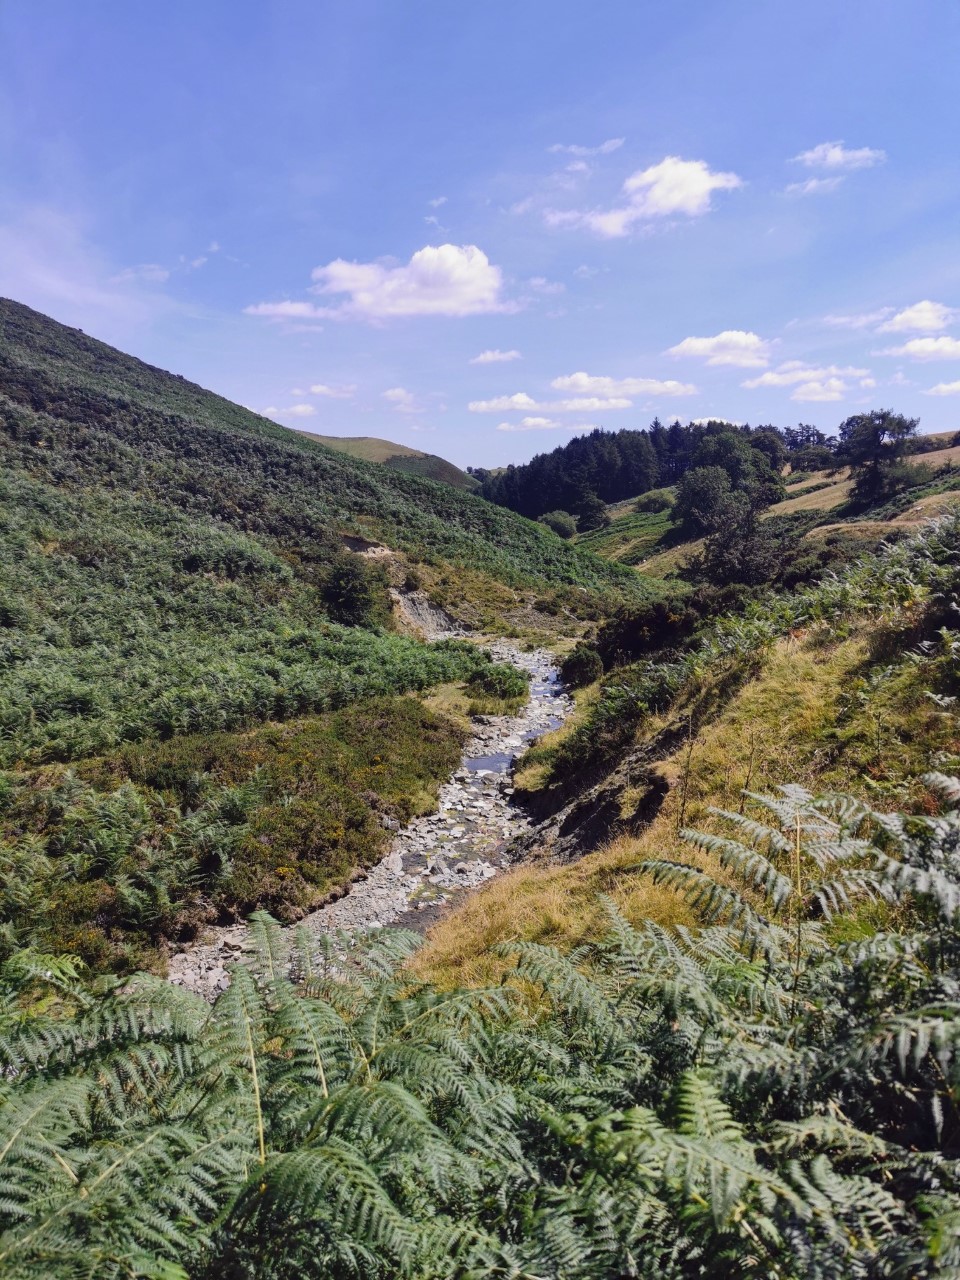 View of the young River Lugg near its source in the Welsh Hills